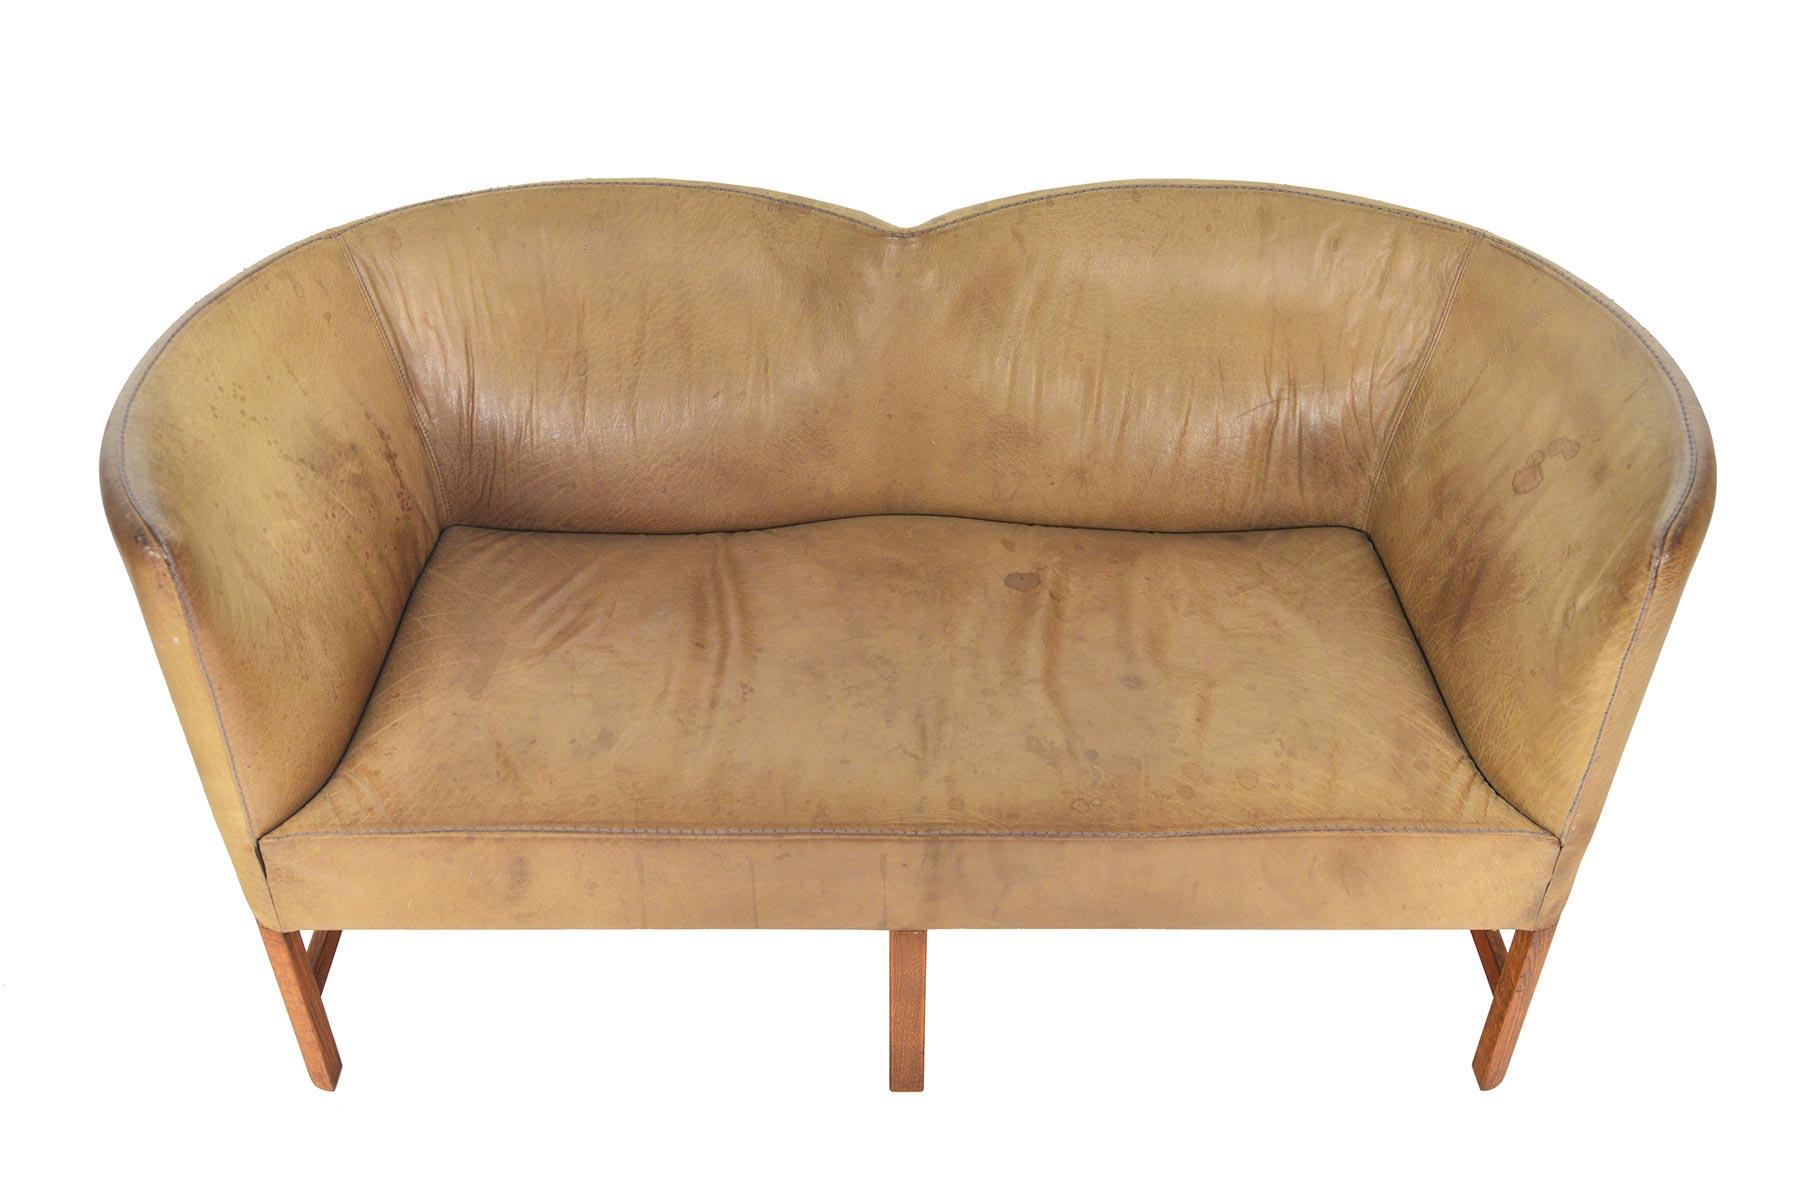 This understated Danish modern loveseat is covered in exquisitely patinated leather that only decades of time can create! With a silhouette similar to Børge Mogensen’s 2214 sofa, this high back sofa offers two converging scooped backrests. Sofa